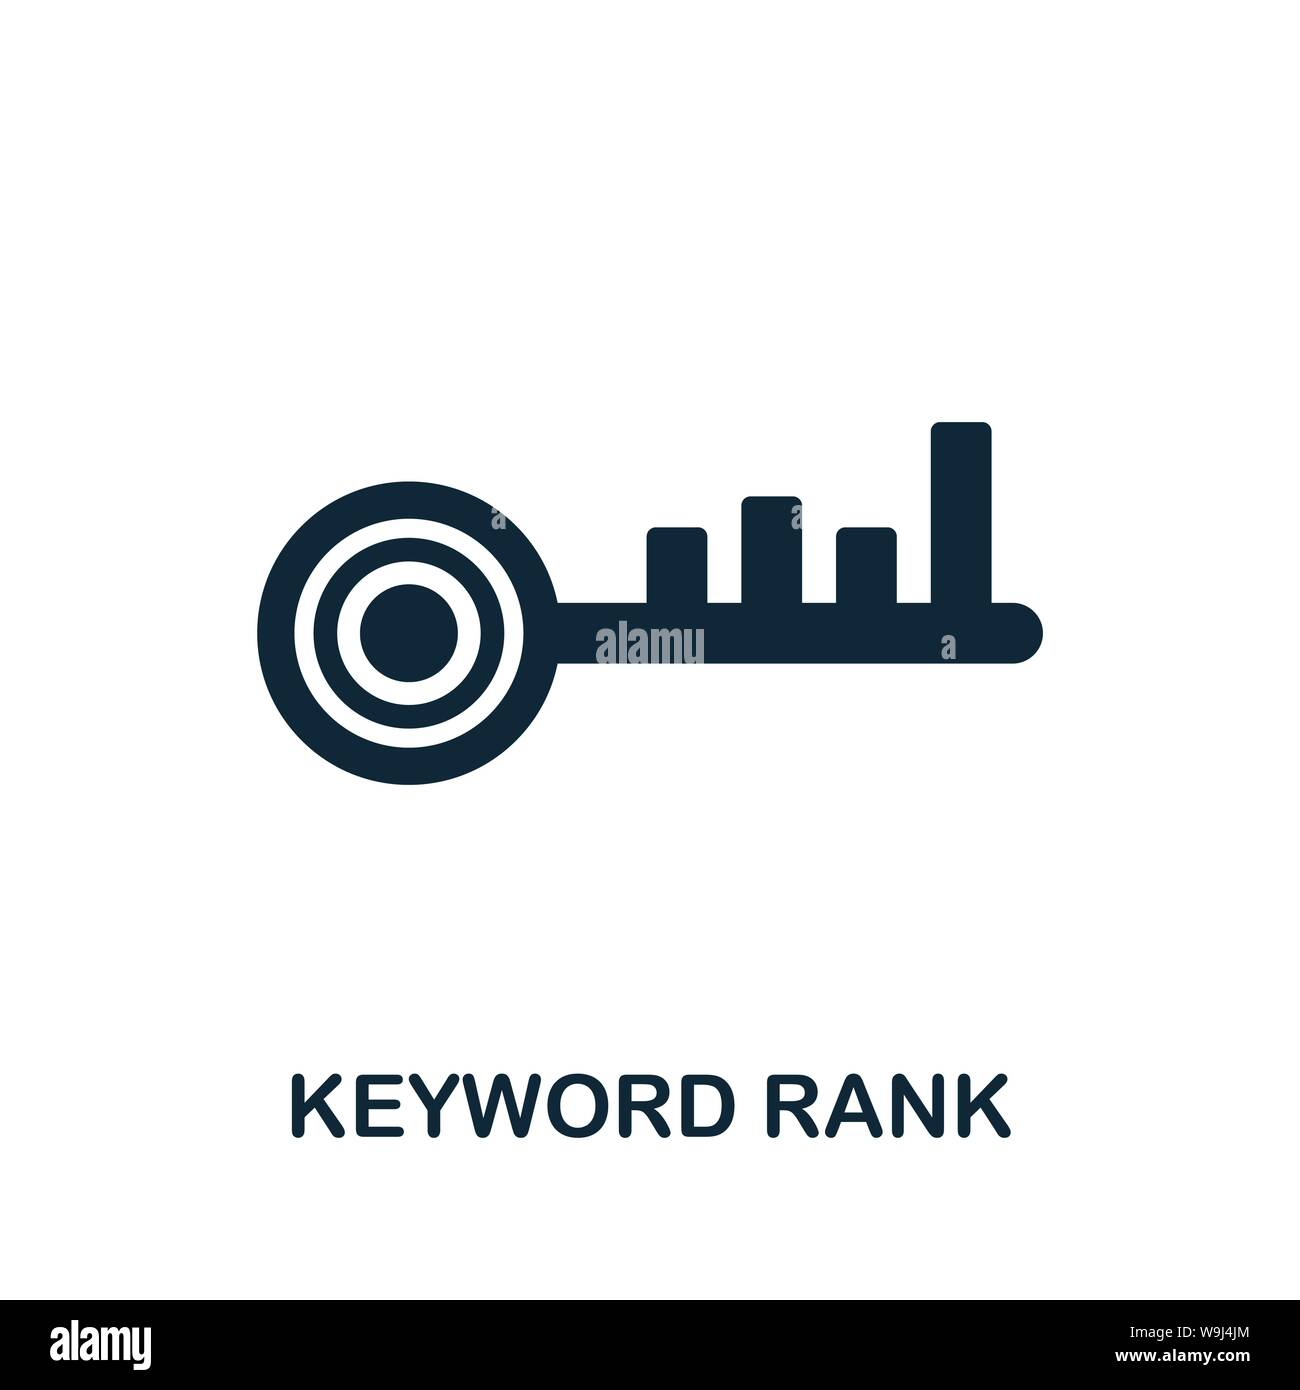 https www alamy com keyword rank vector icon symbol creative sign from seo and development icons collection filled flat keyword rank icon for computer and mobile image264086220 html